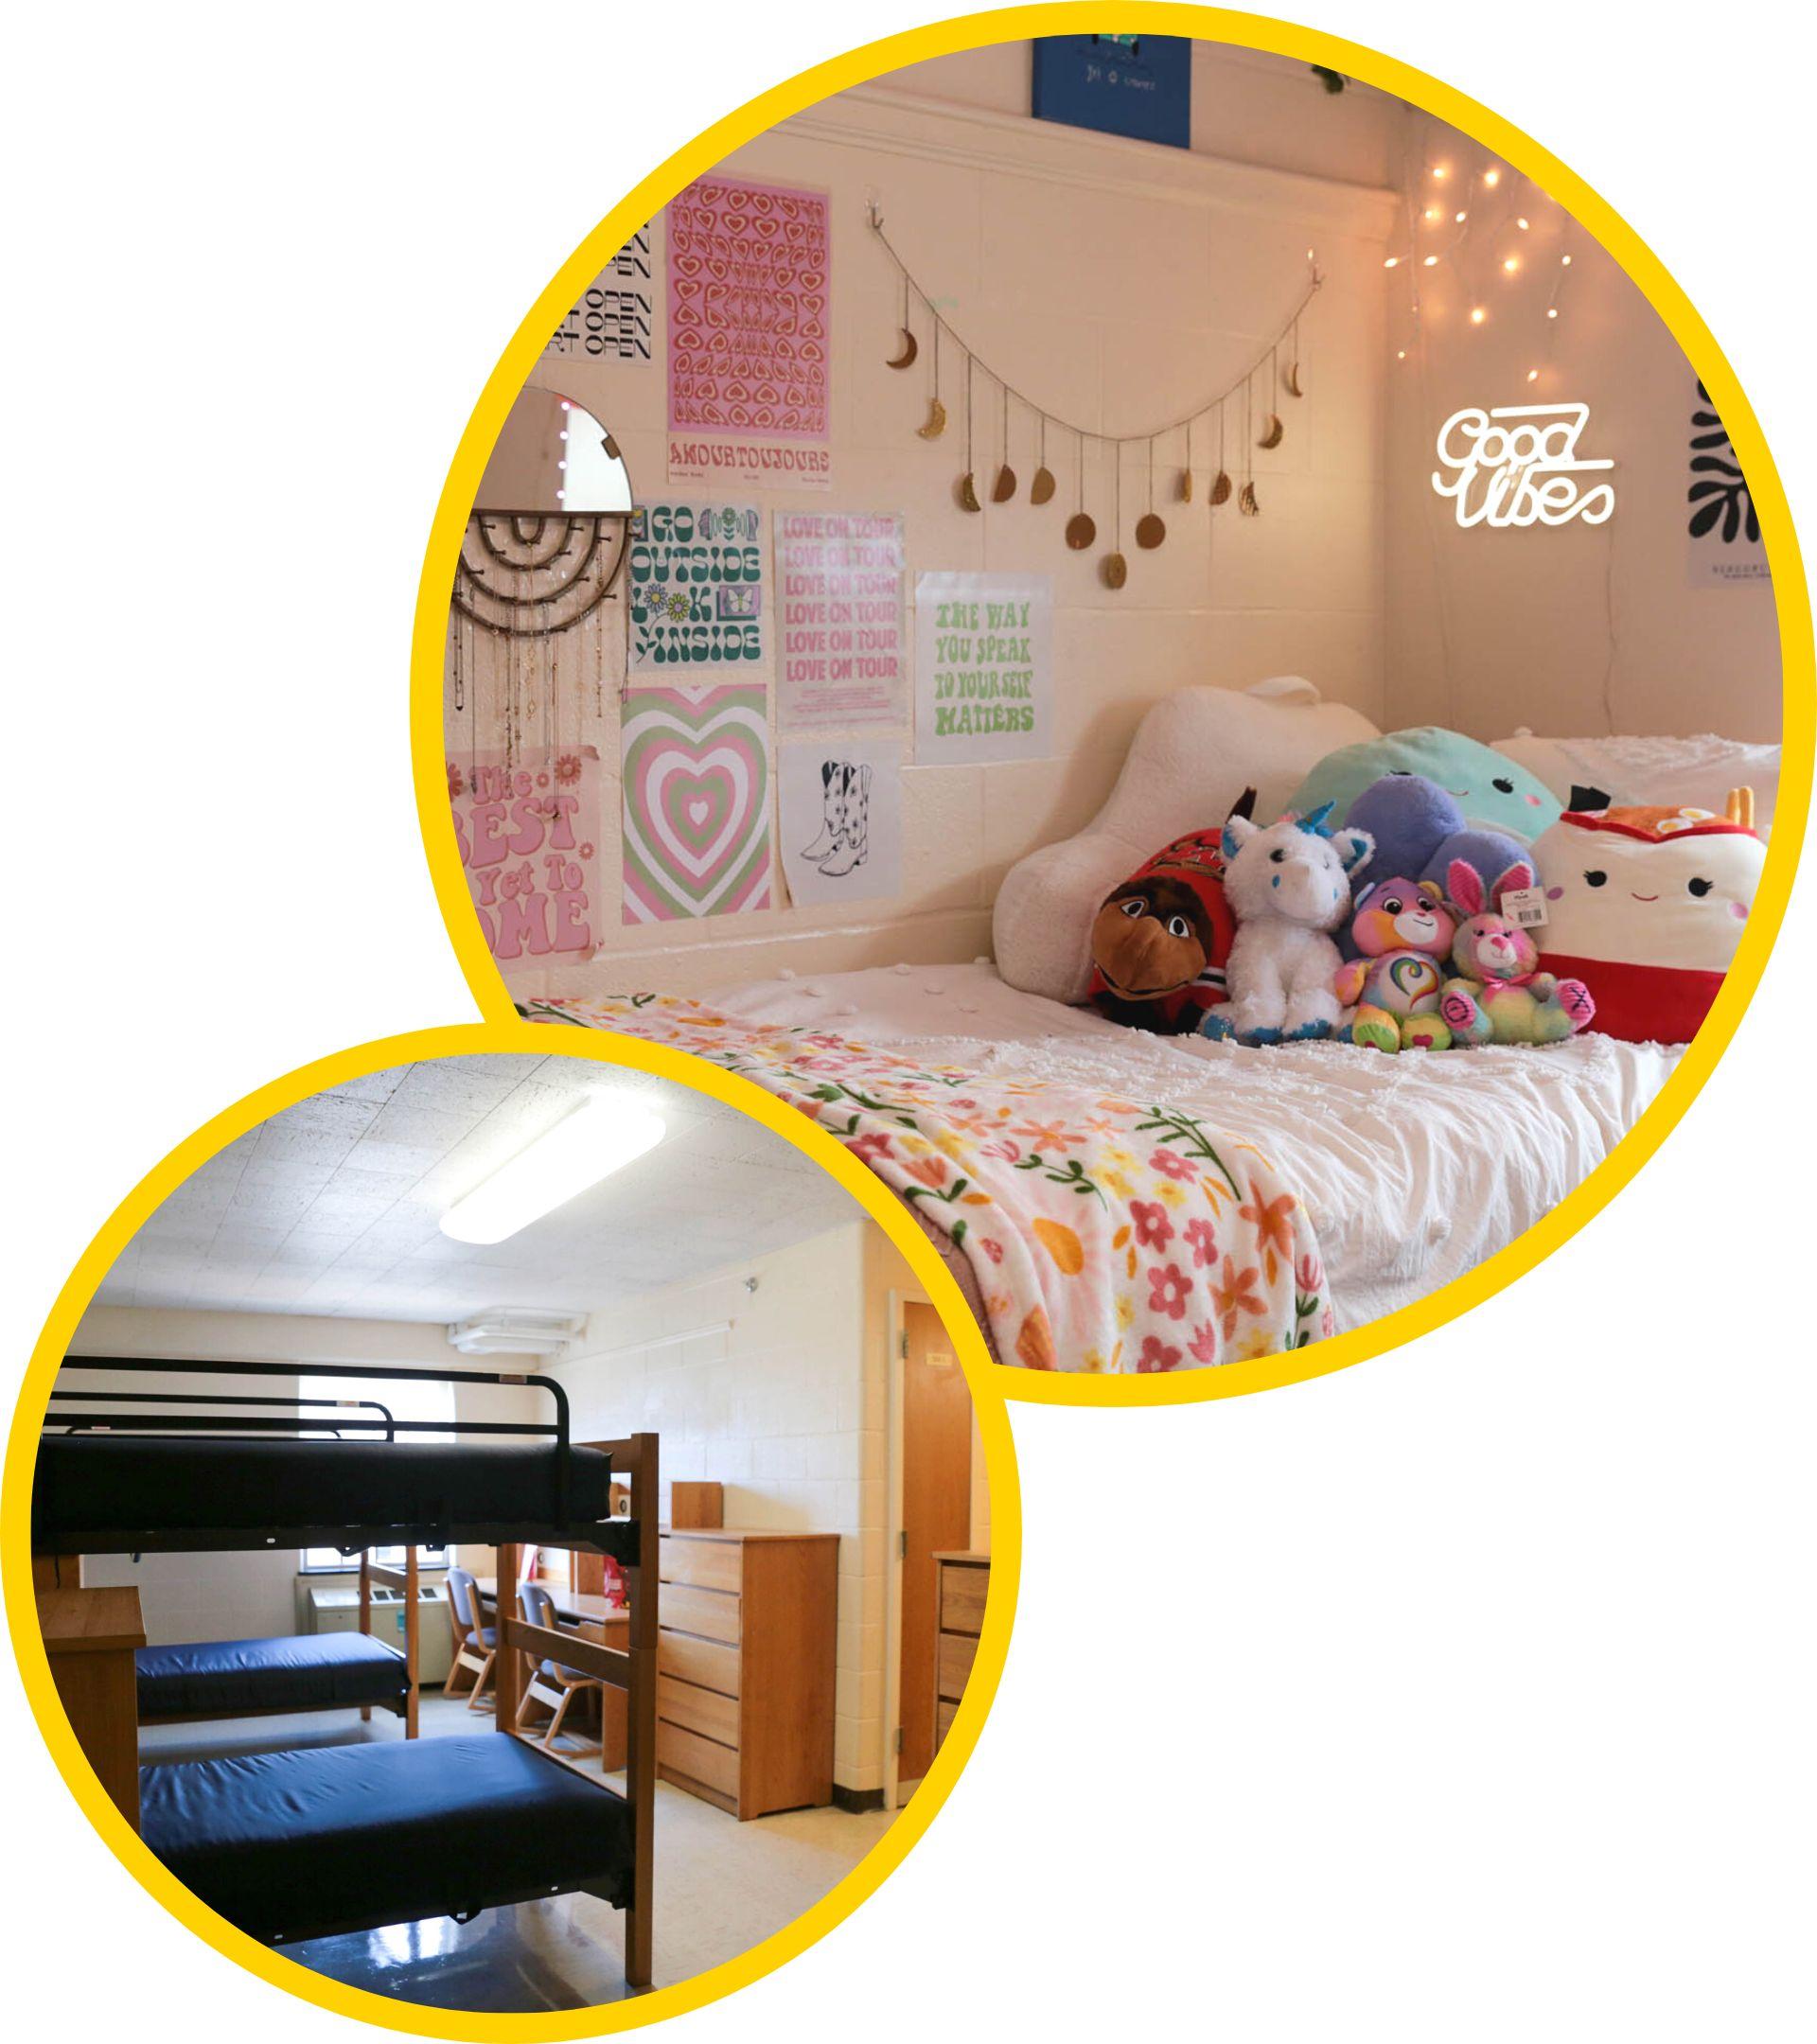 two residence hall rooms, one decorated and one undecorated